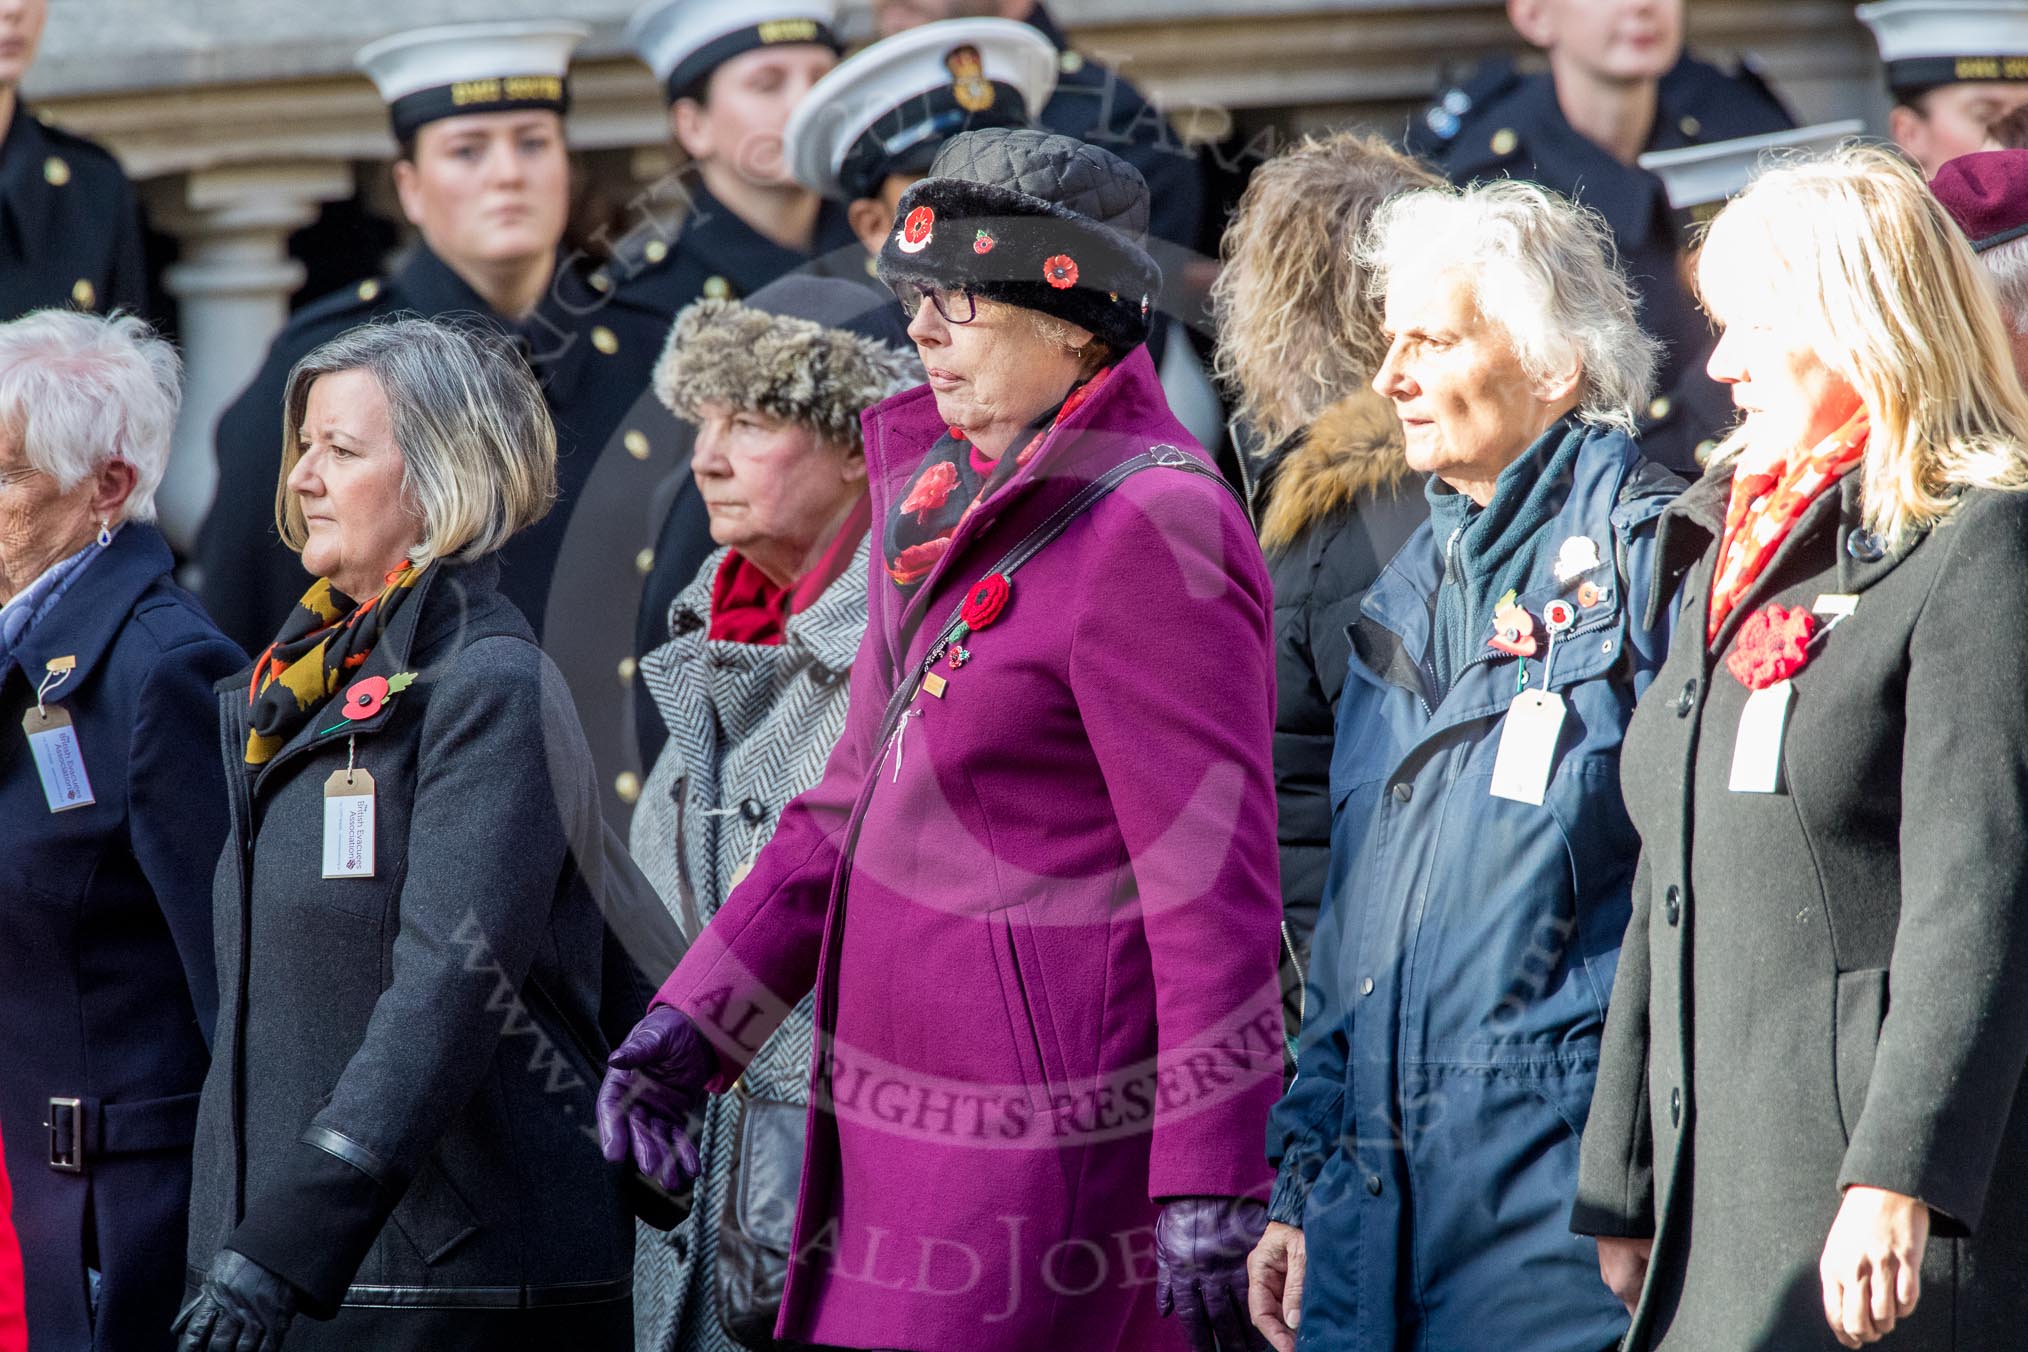 The British Evacuees Association (Group M4, 50 members) during the Royal British Legion March Past on Remembrance Sunday at the Cenotaph, Whitehall, Westminster, London, 11 November 2018, 12:25.